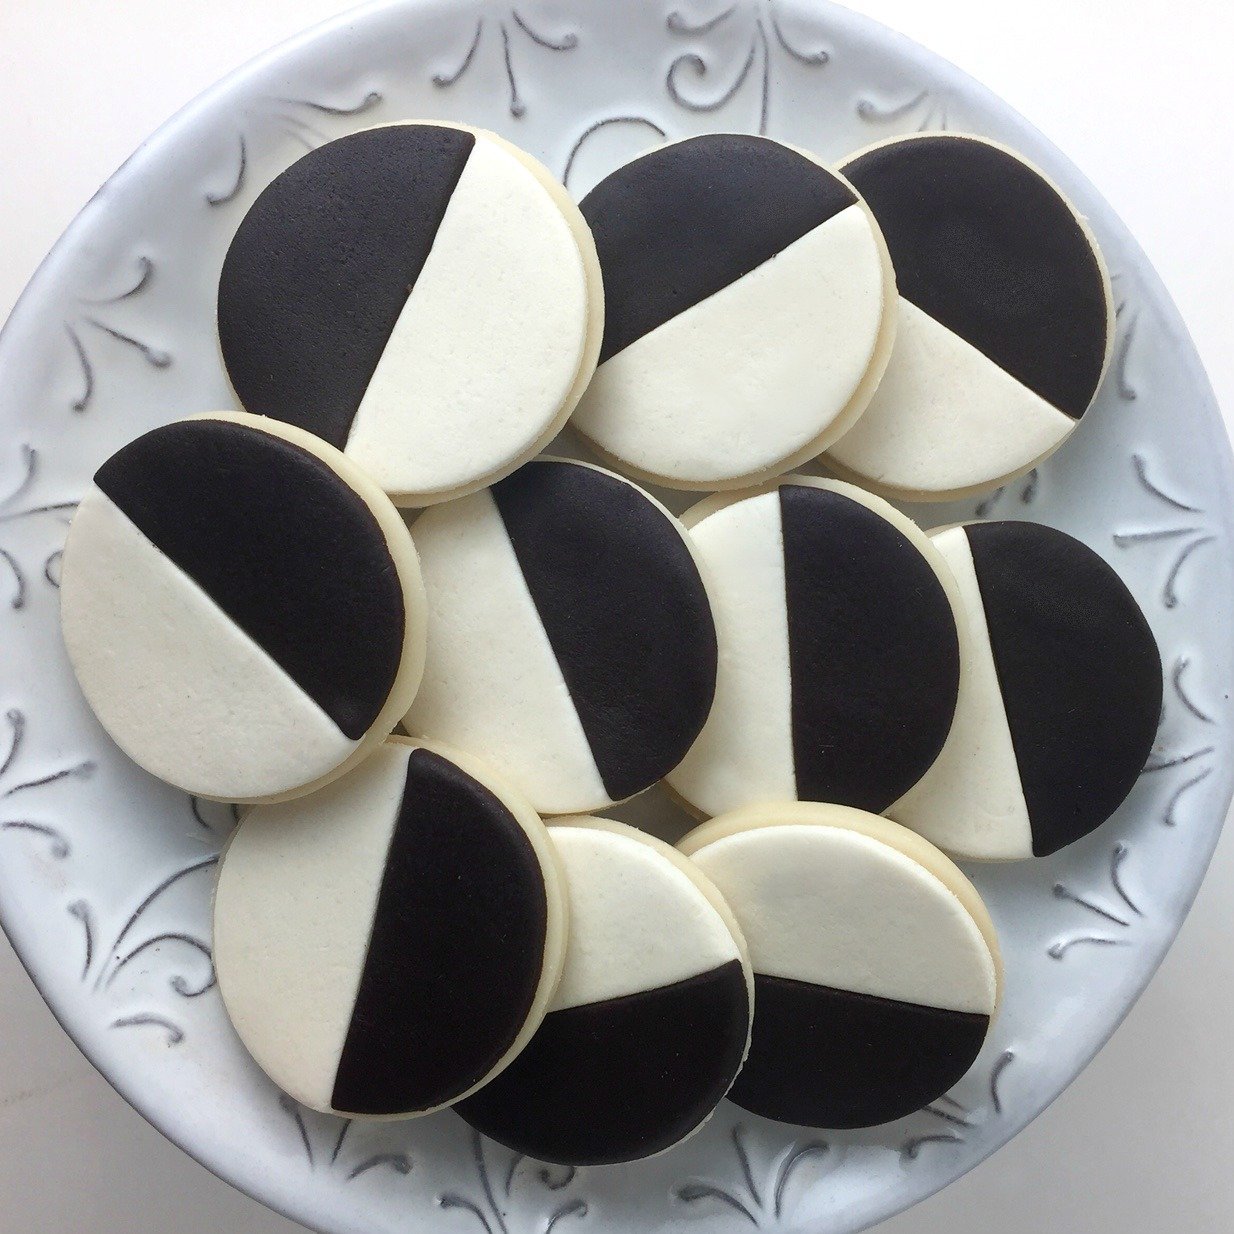 Marzipops Candy Marzipan Black & White Cookies